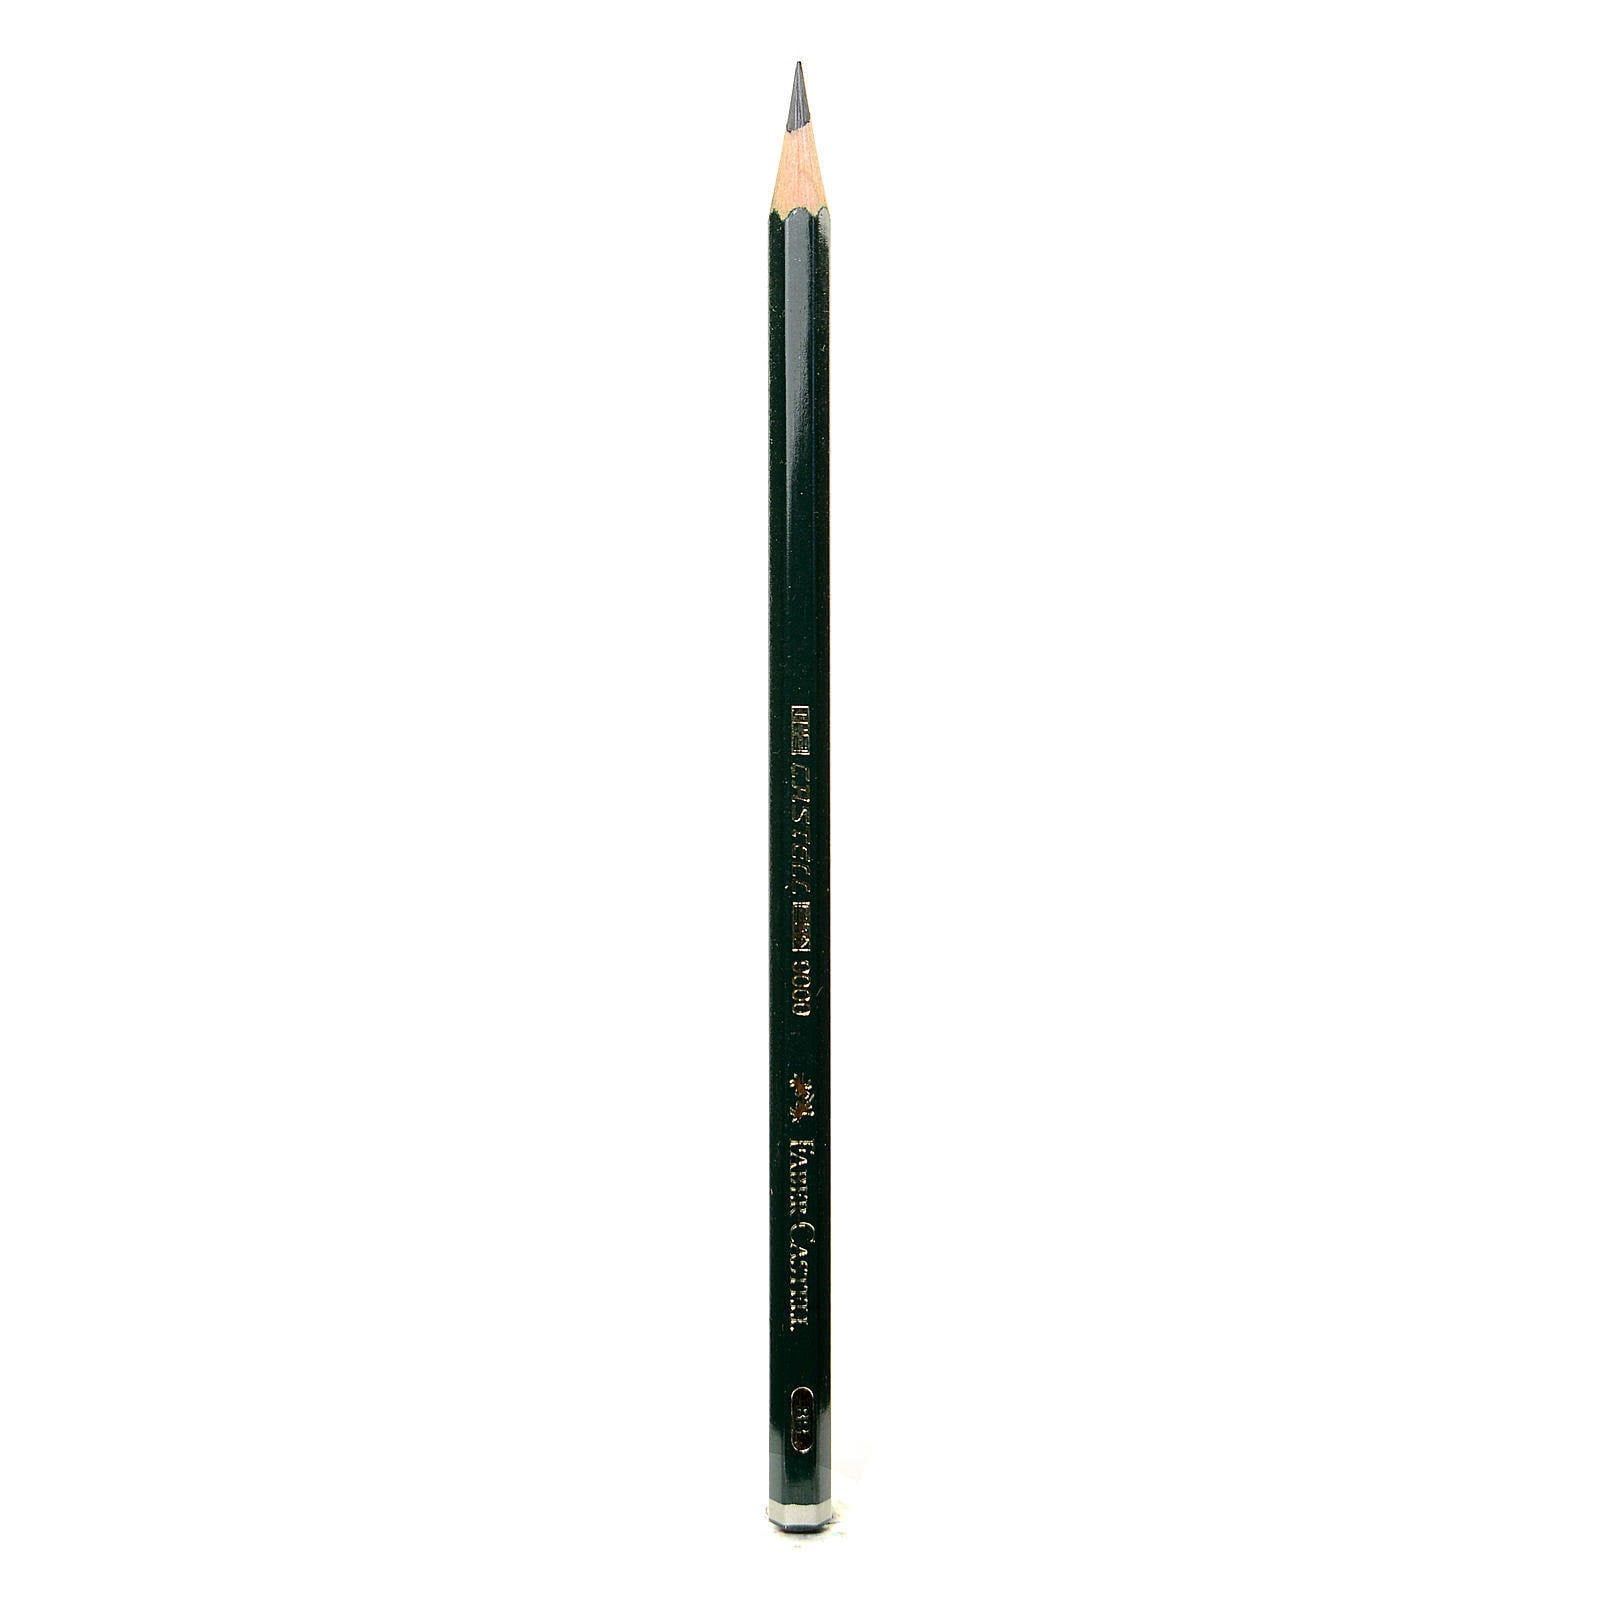  Faber-Castell pencils, Castell 9000 graphite pencils, 8B  Pre-sharpened Black lead pencils for sketch, shading, drawing, artist - box  of 12 (8B)